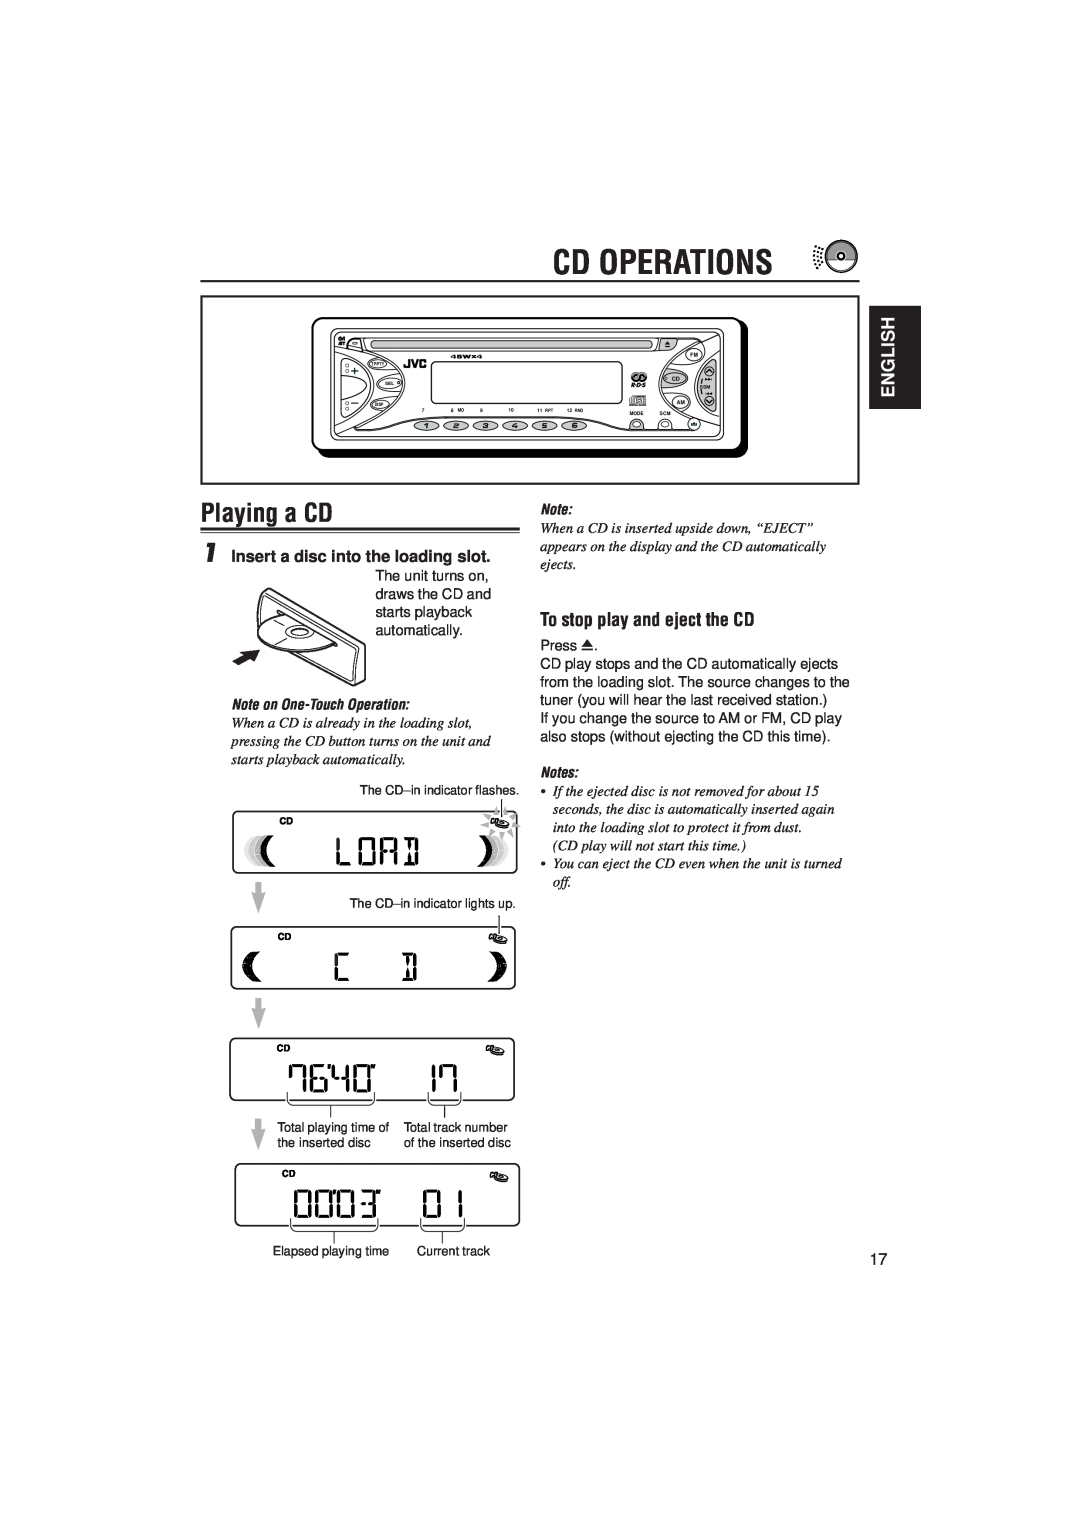 JVC KD-S723R Cd Operations, Playing a CD, To stop play and eject the CD, English, Note on One-TouchOperation, 8 MO, 11 RPT 